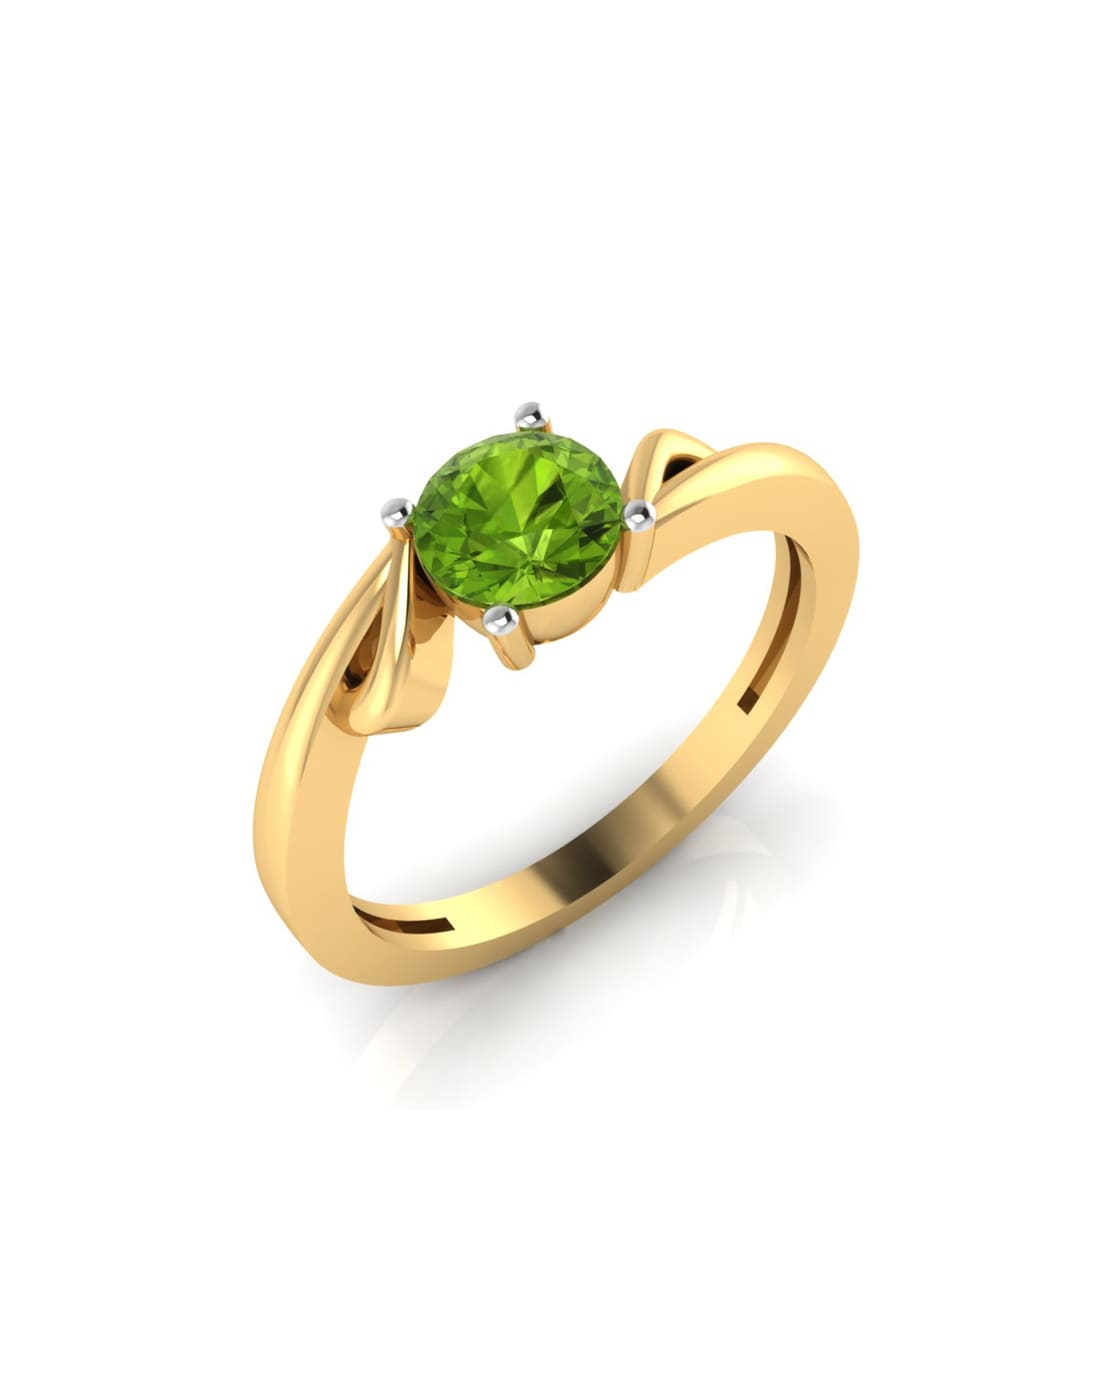 Gold Ring Featuring a Peridot Green Crystal + Halo of Crystals | Ferris by  Oomiay – Oomiay Jewelry